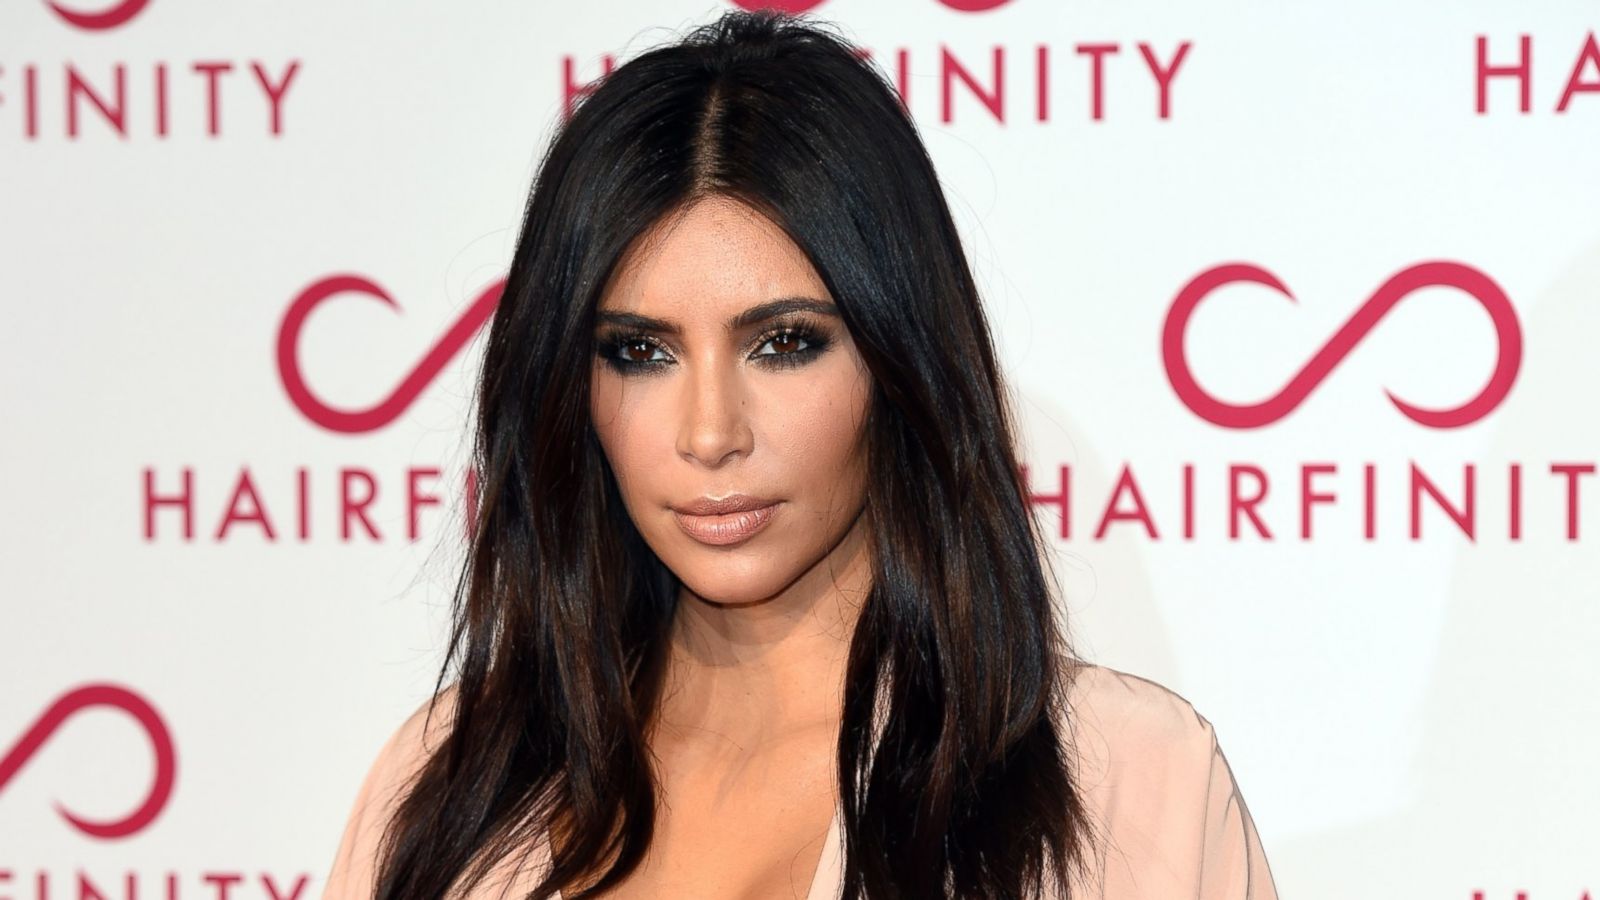 She's Lost Her Mind! Kim Kardashian Unveils Loony Ad For Her